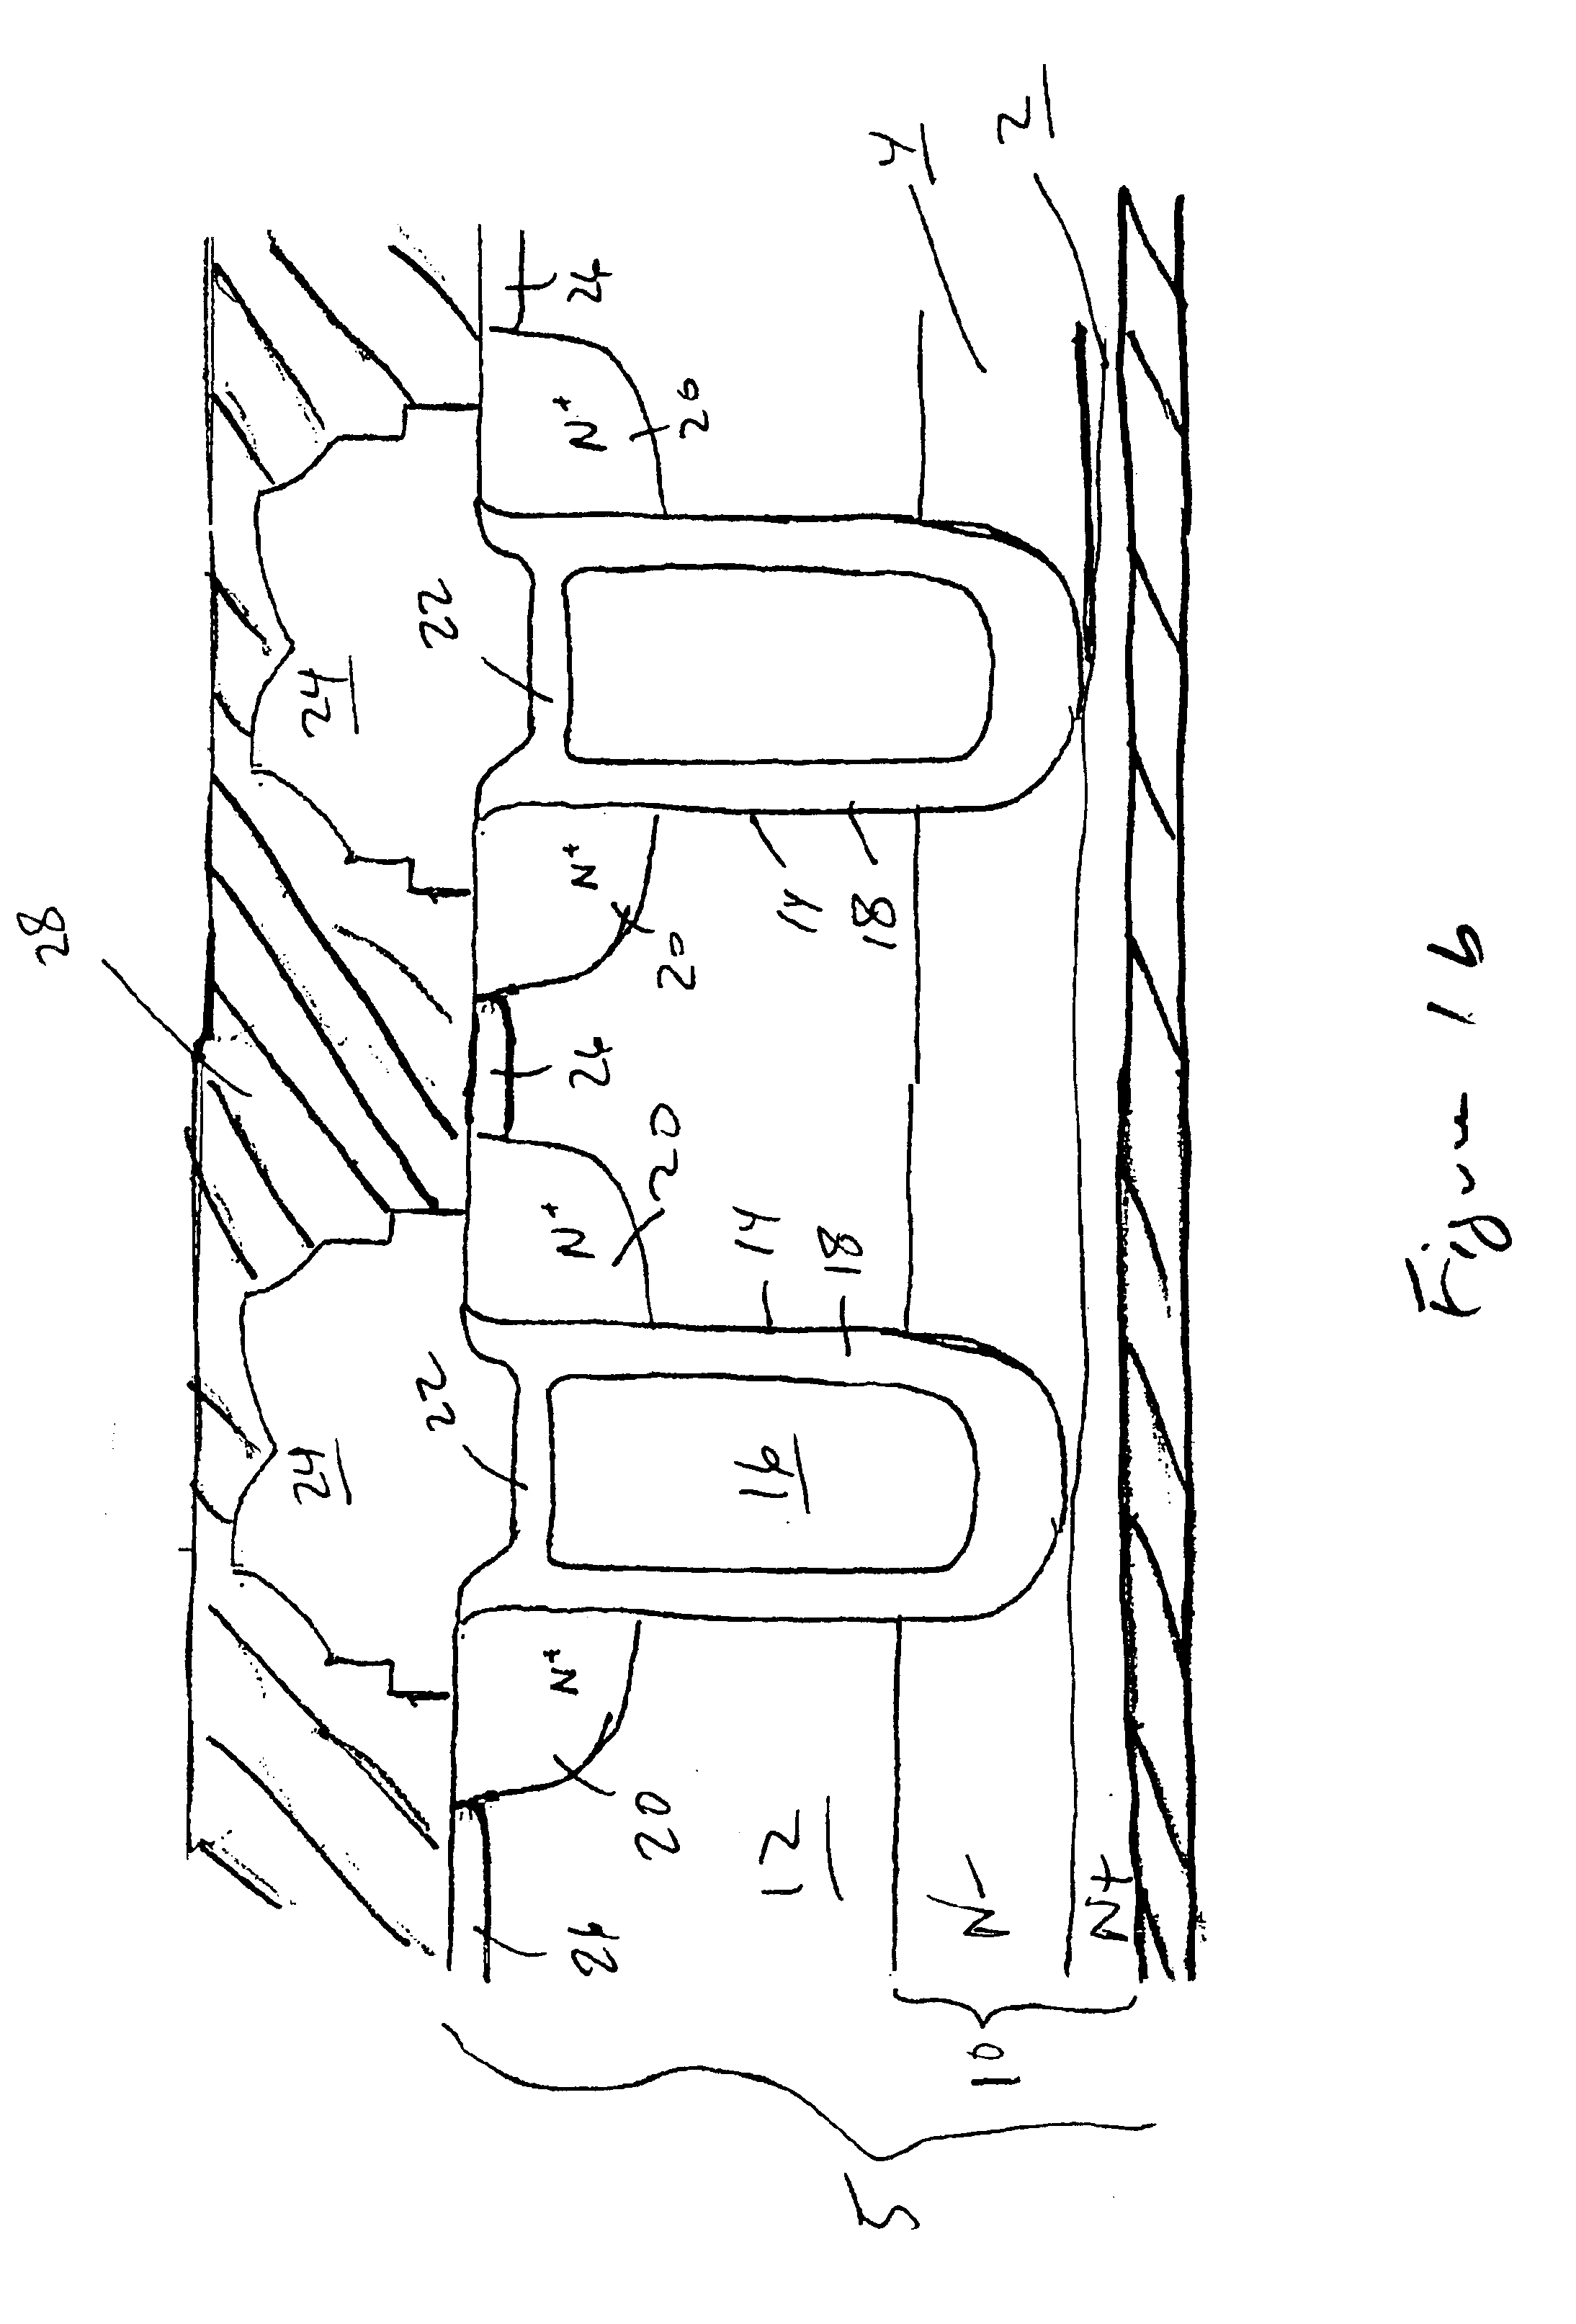 Method for manufacturing a semiconductor device with a trench termination